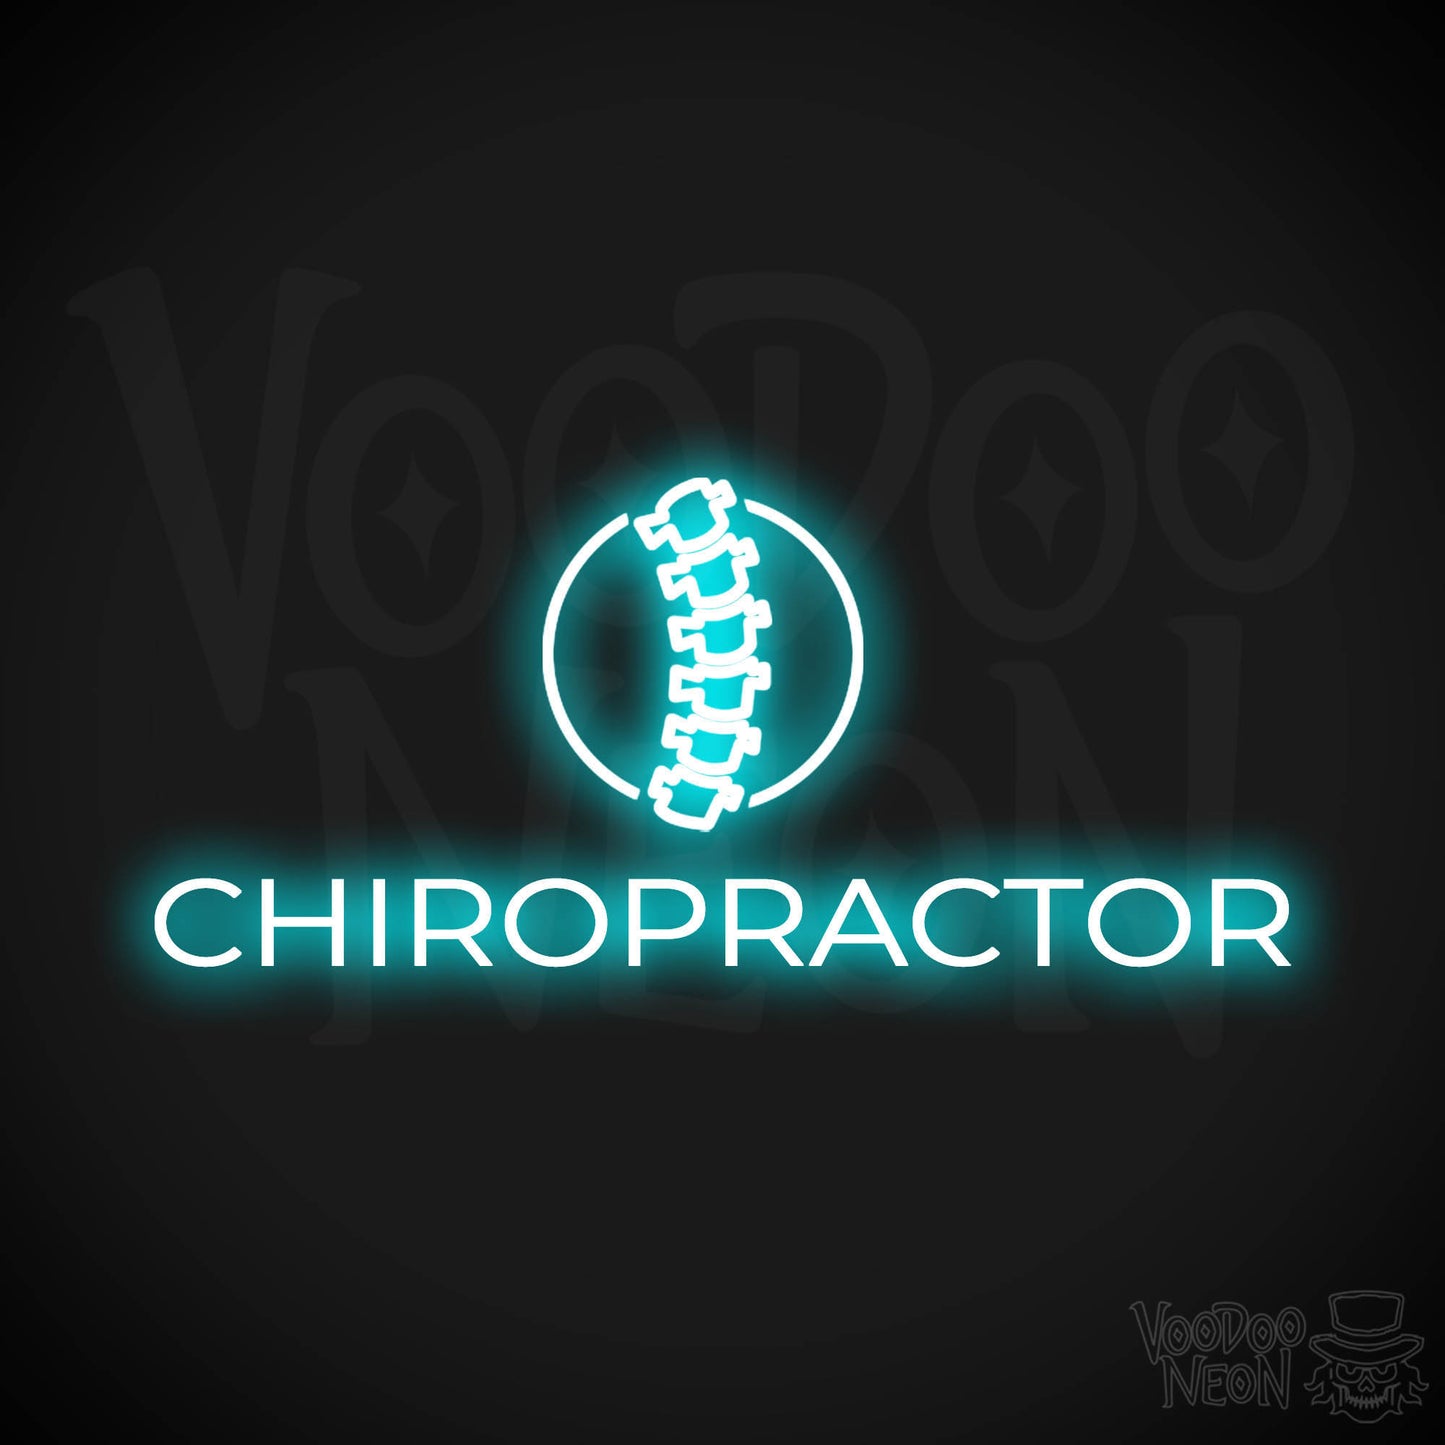 Chiropractor LED Neon - Ice Blue